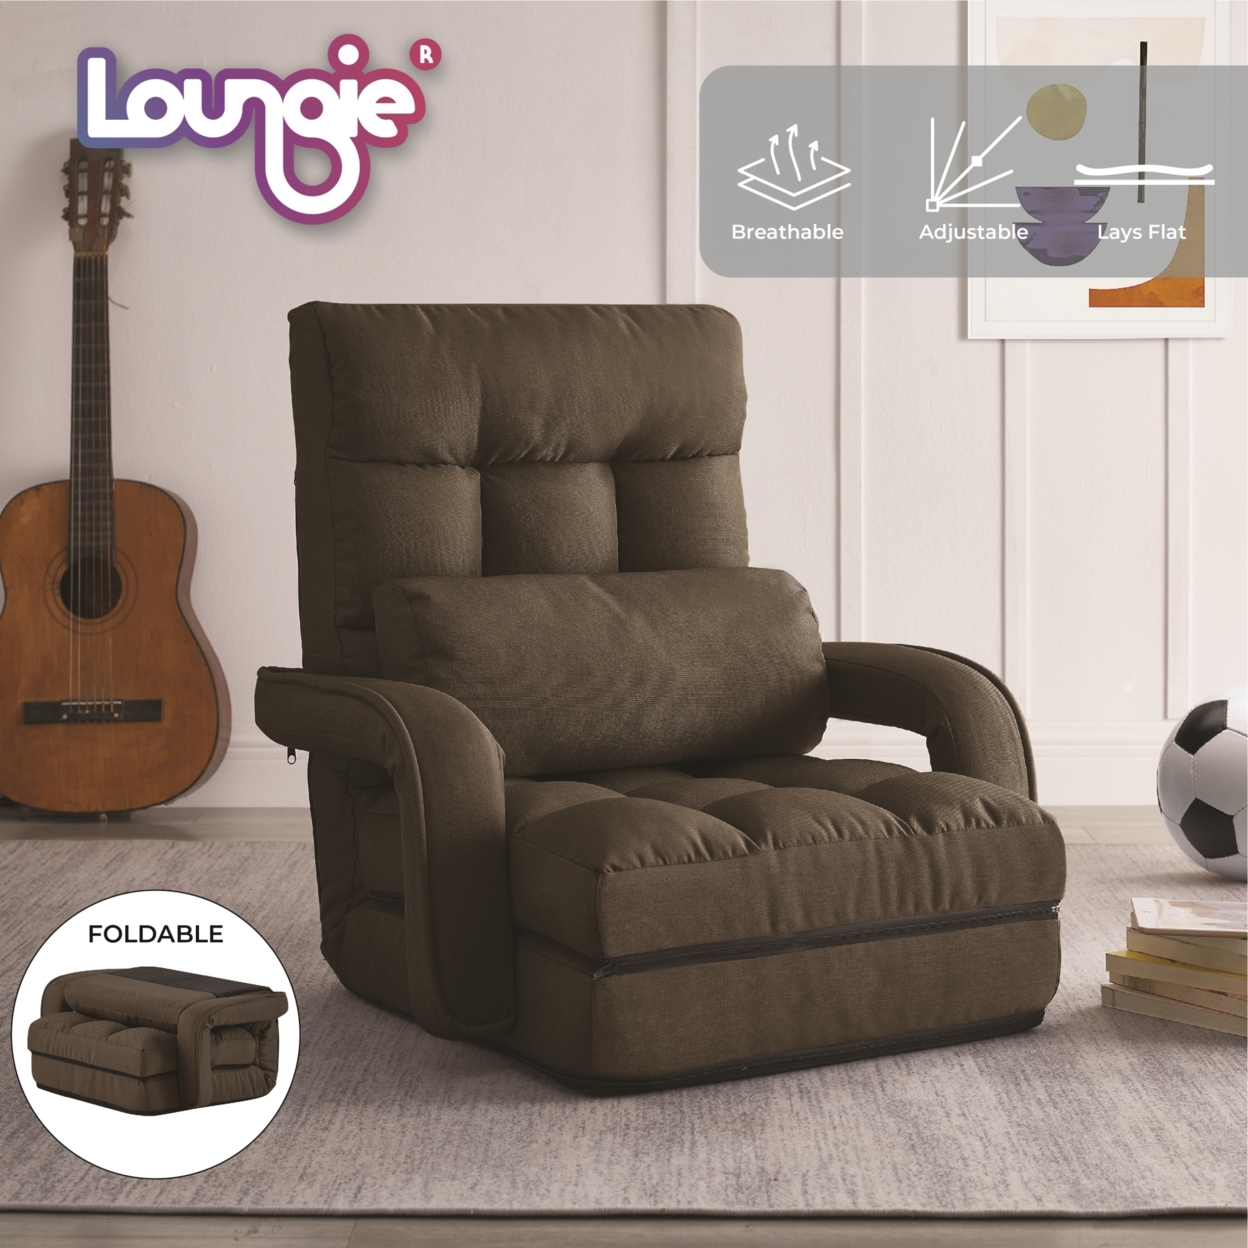 Nella Chair - 5 Adjustable Positions, Foldable, Back Support Pillow, Washable Cover, Steel Rod Construction - Brown